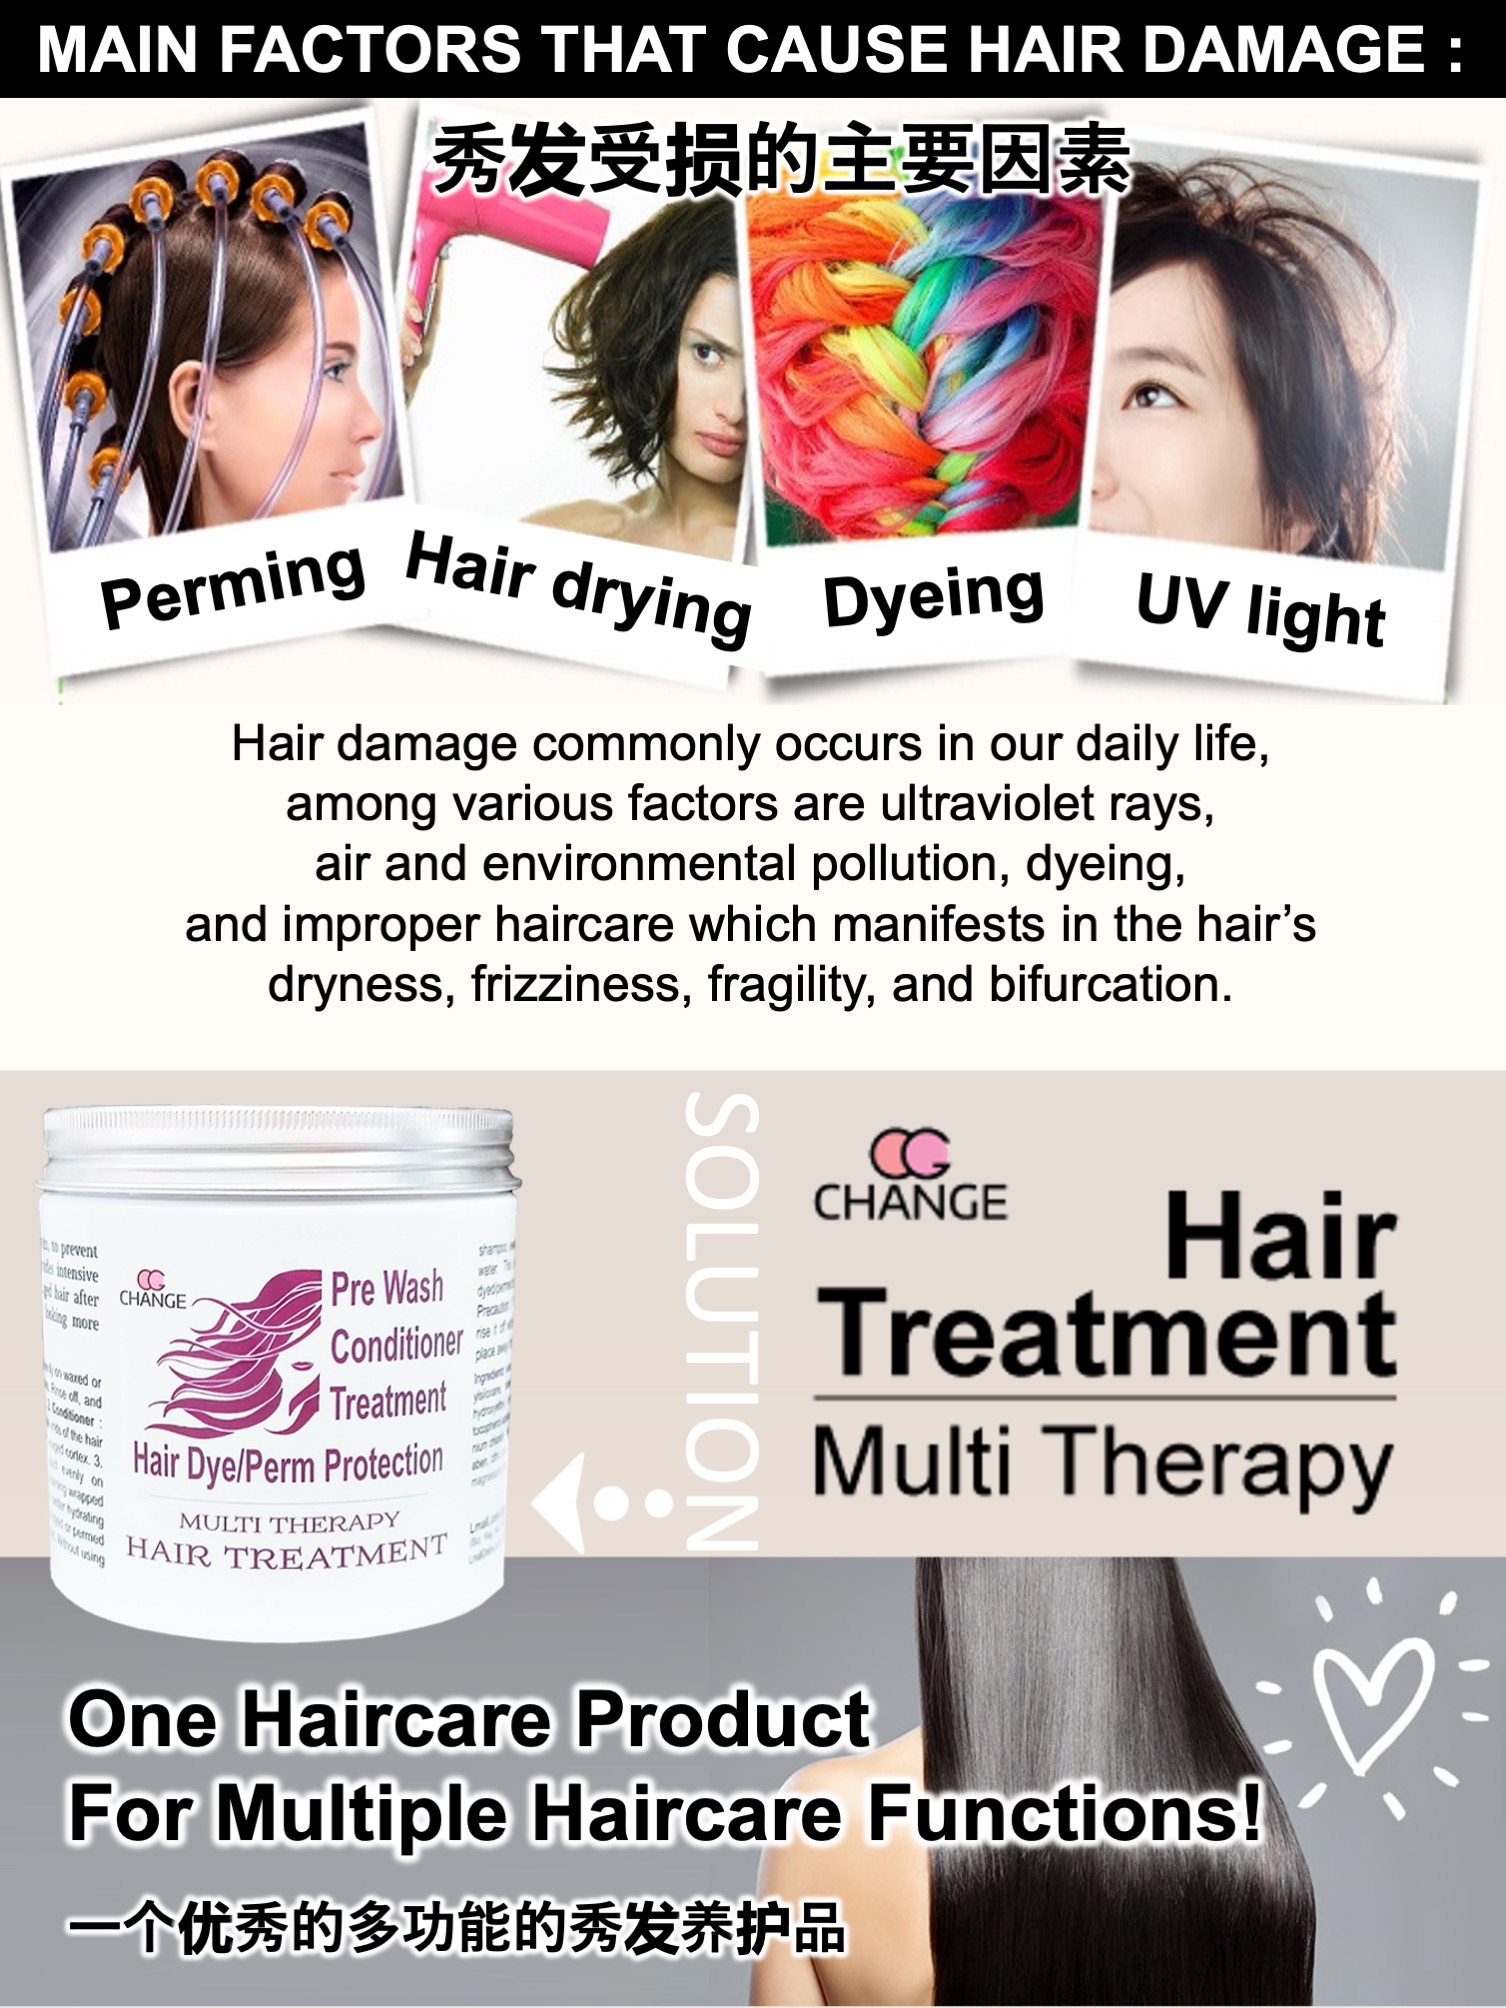 multi-therapy-hair-treatment-20212